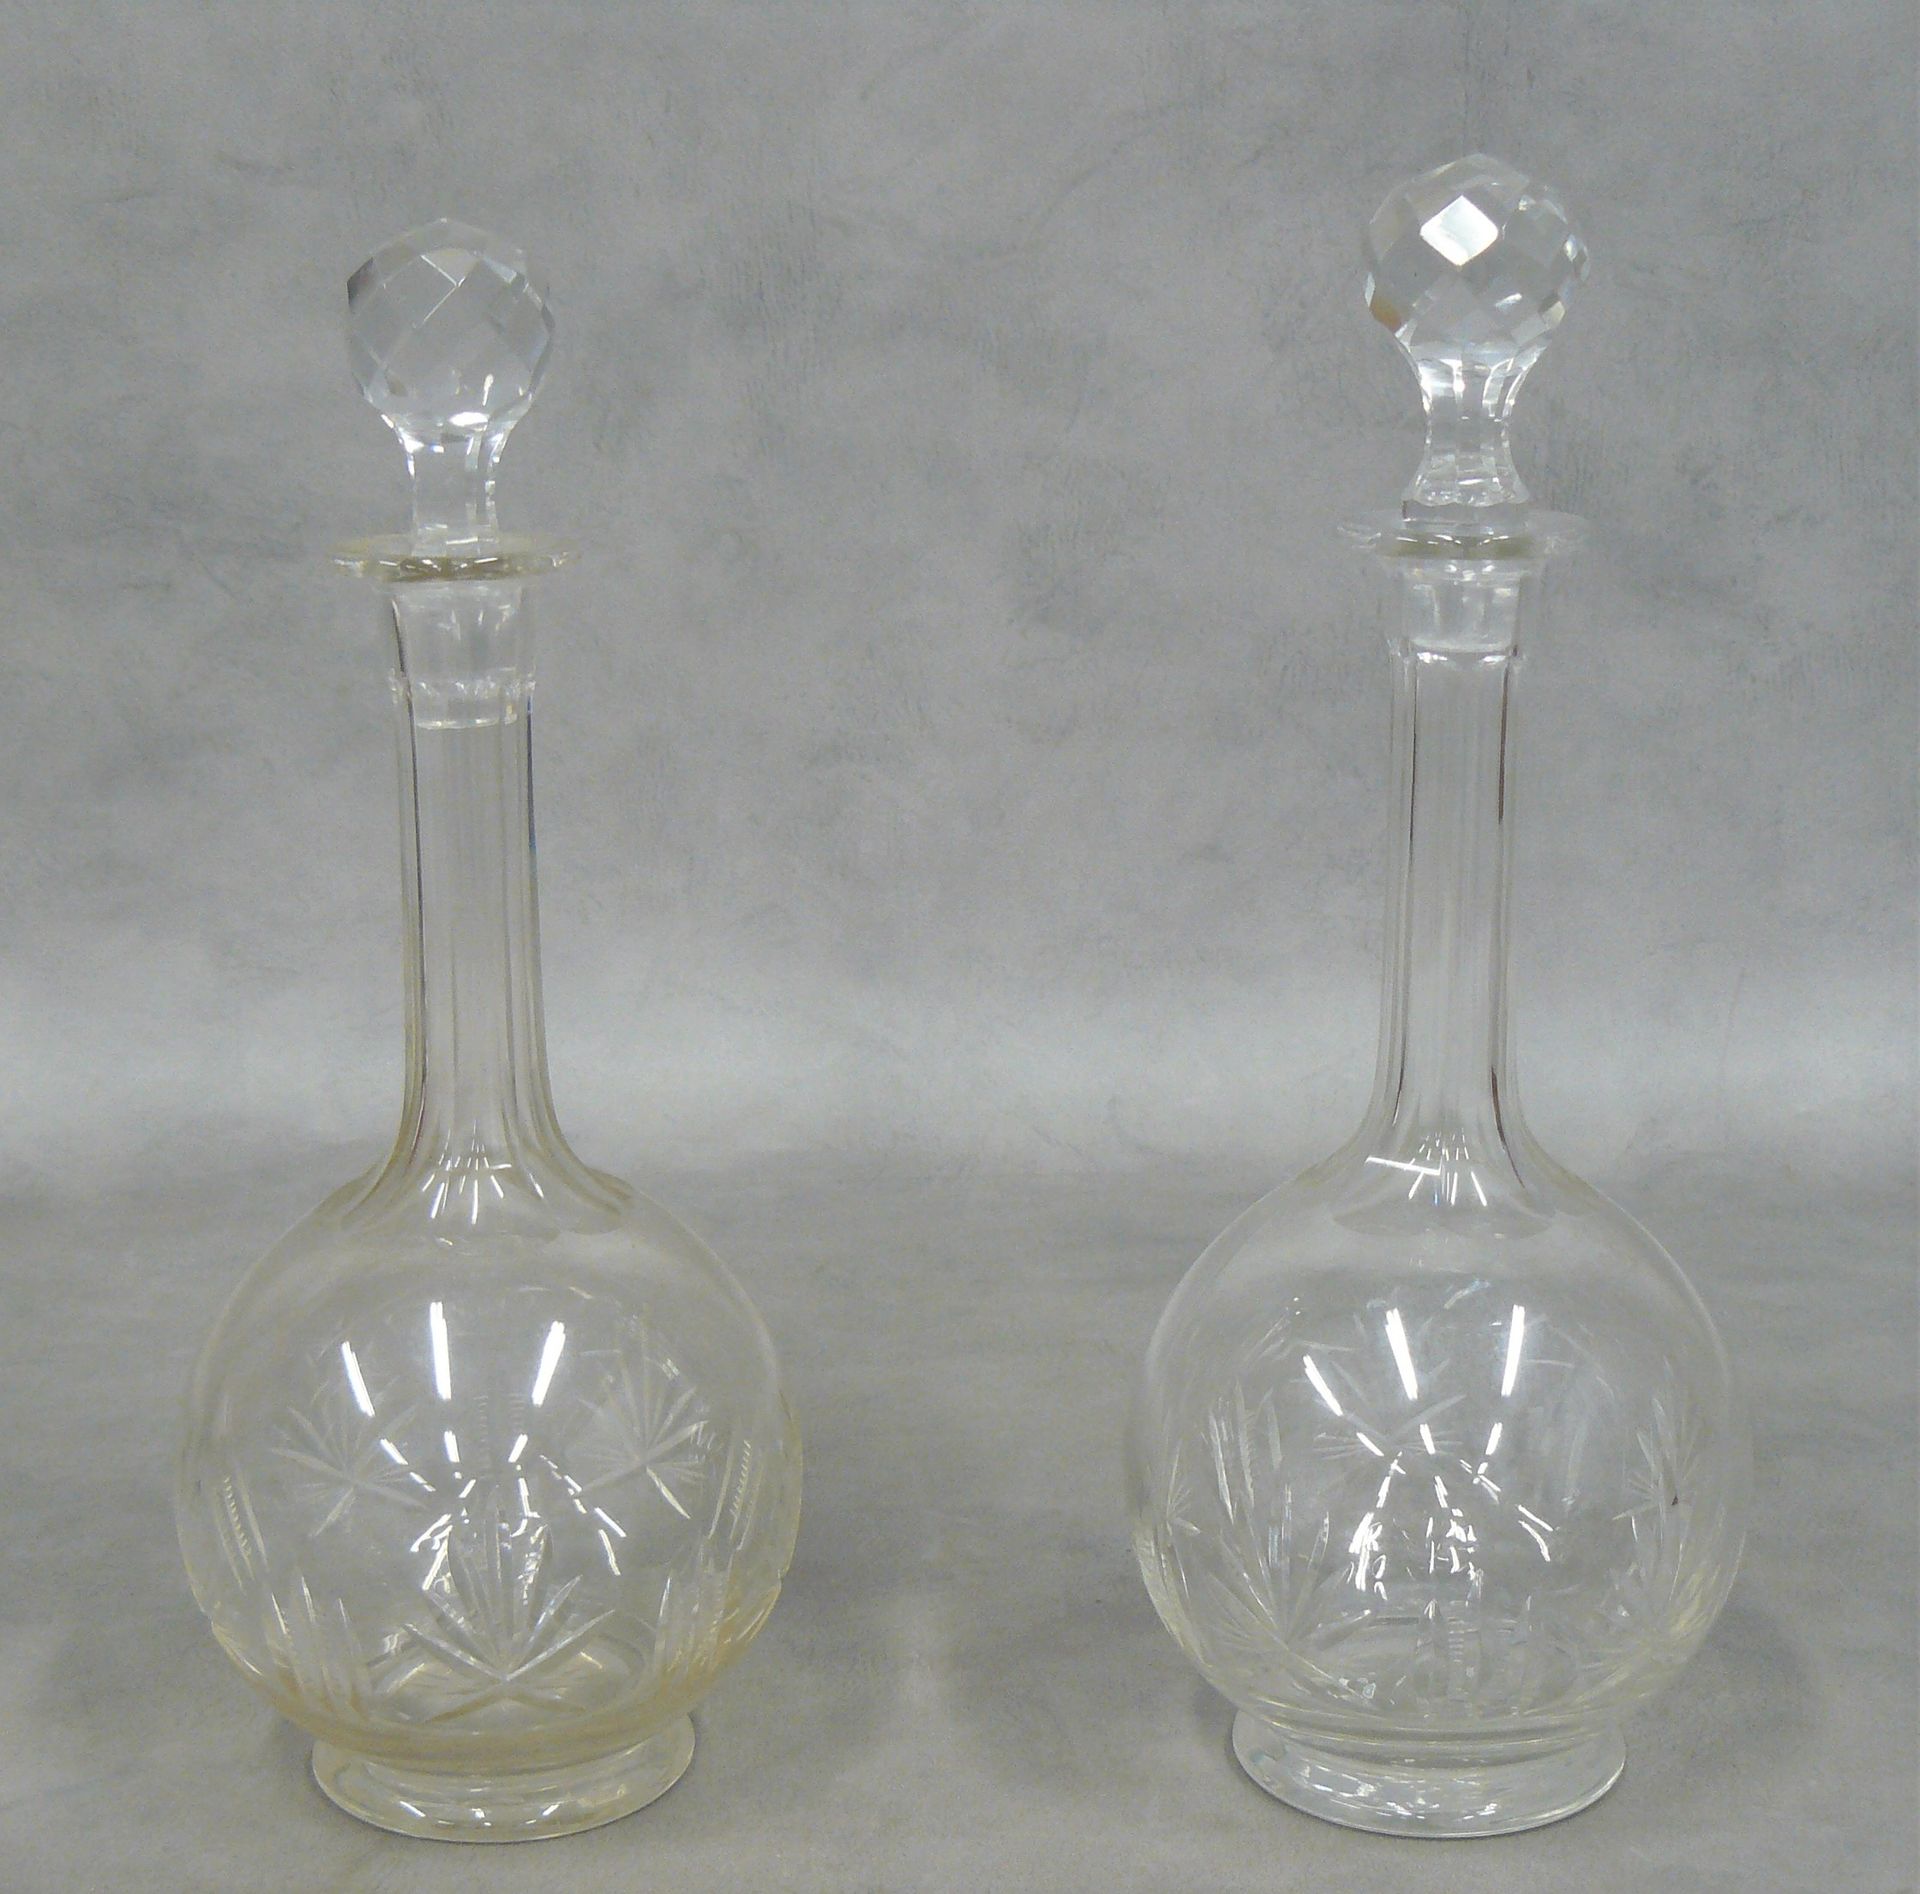 Null a set of two decanters with stoppers - H 30 cm